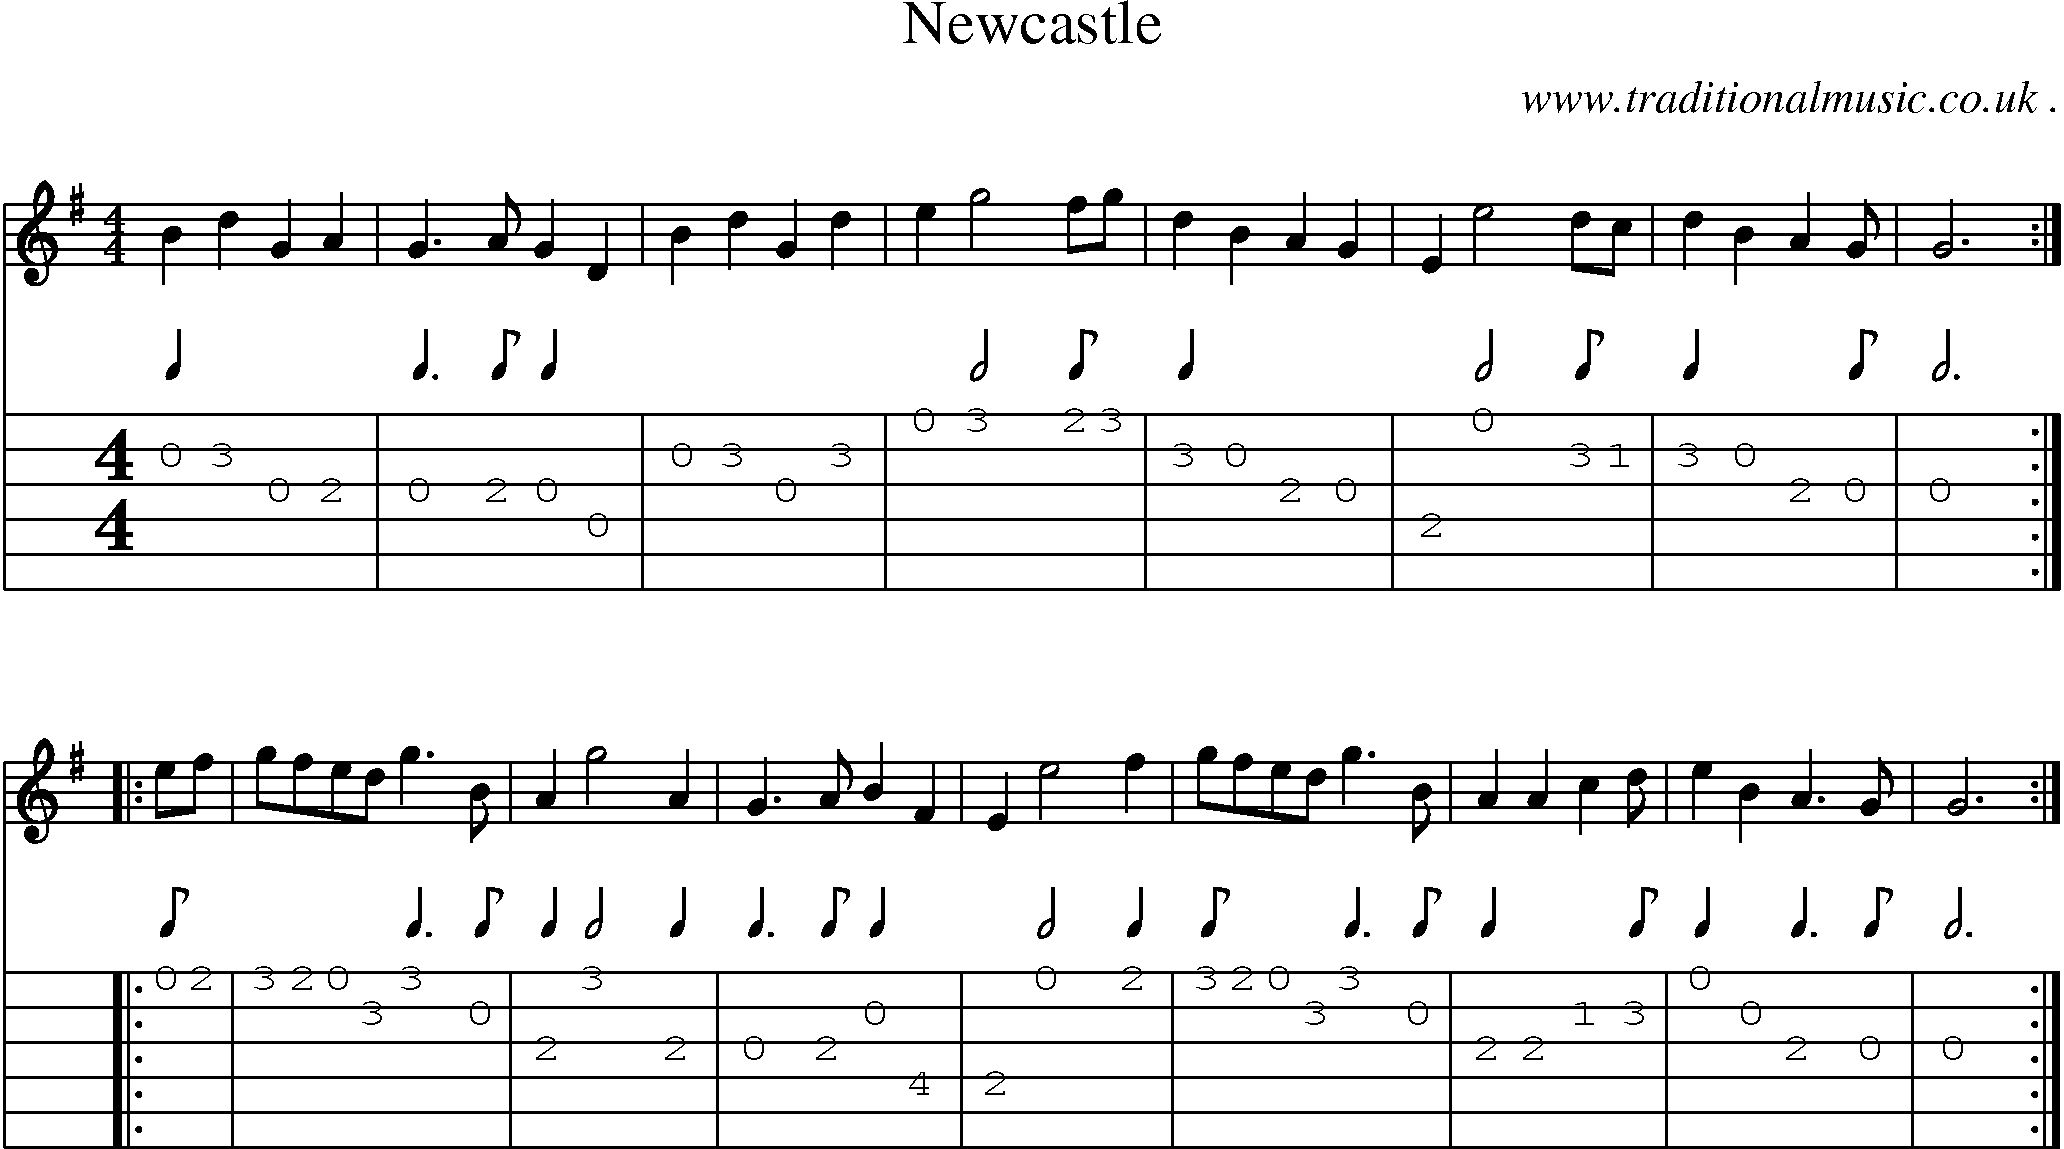 Sheet-Music and Guitar Tabs for Newcastle